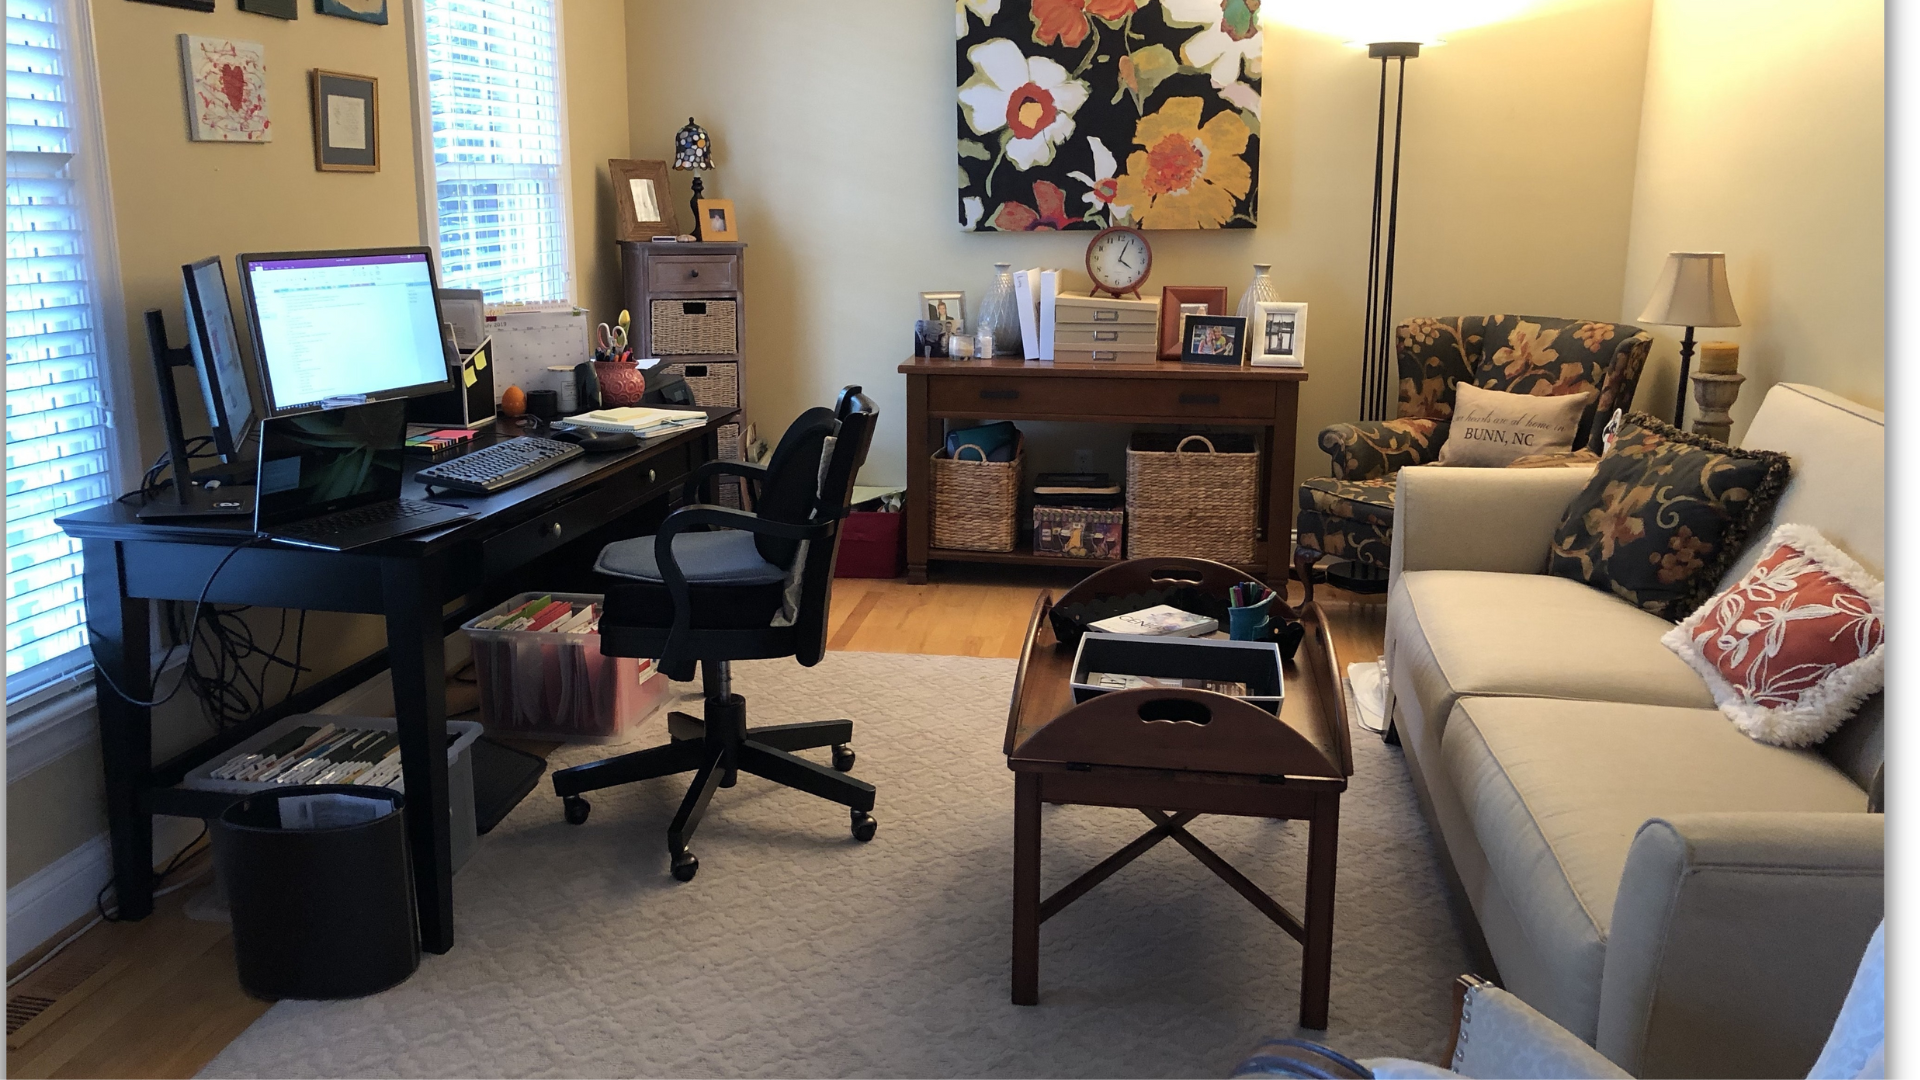 Does Your Home Office Need a Make-Over?